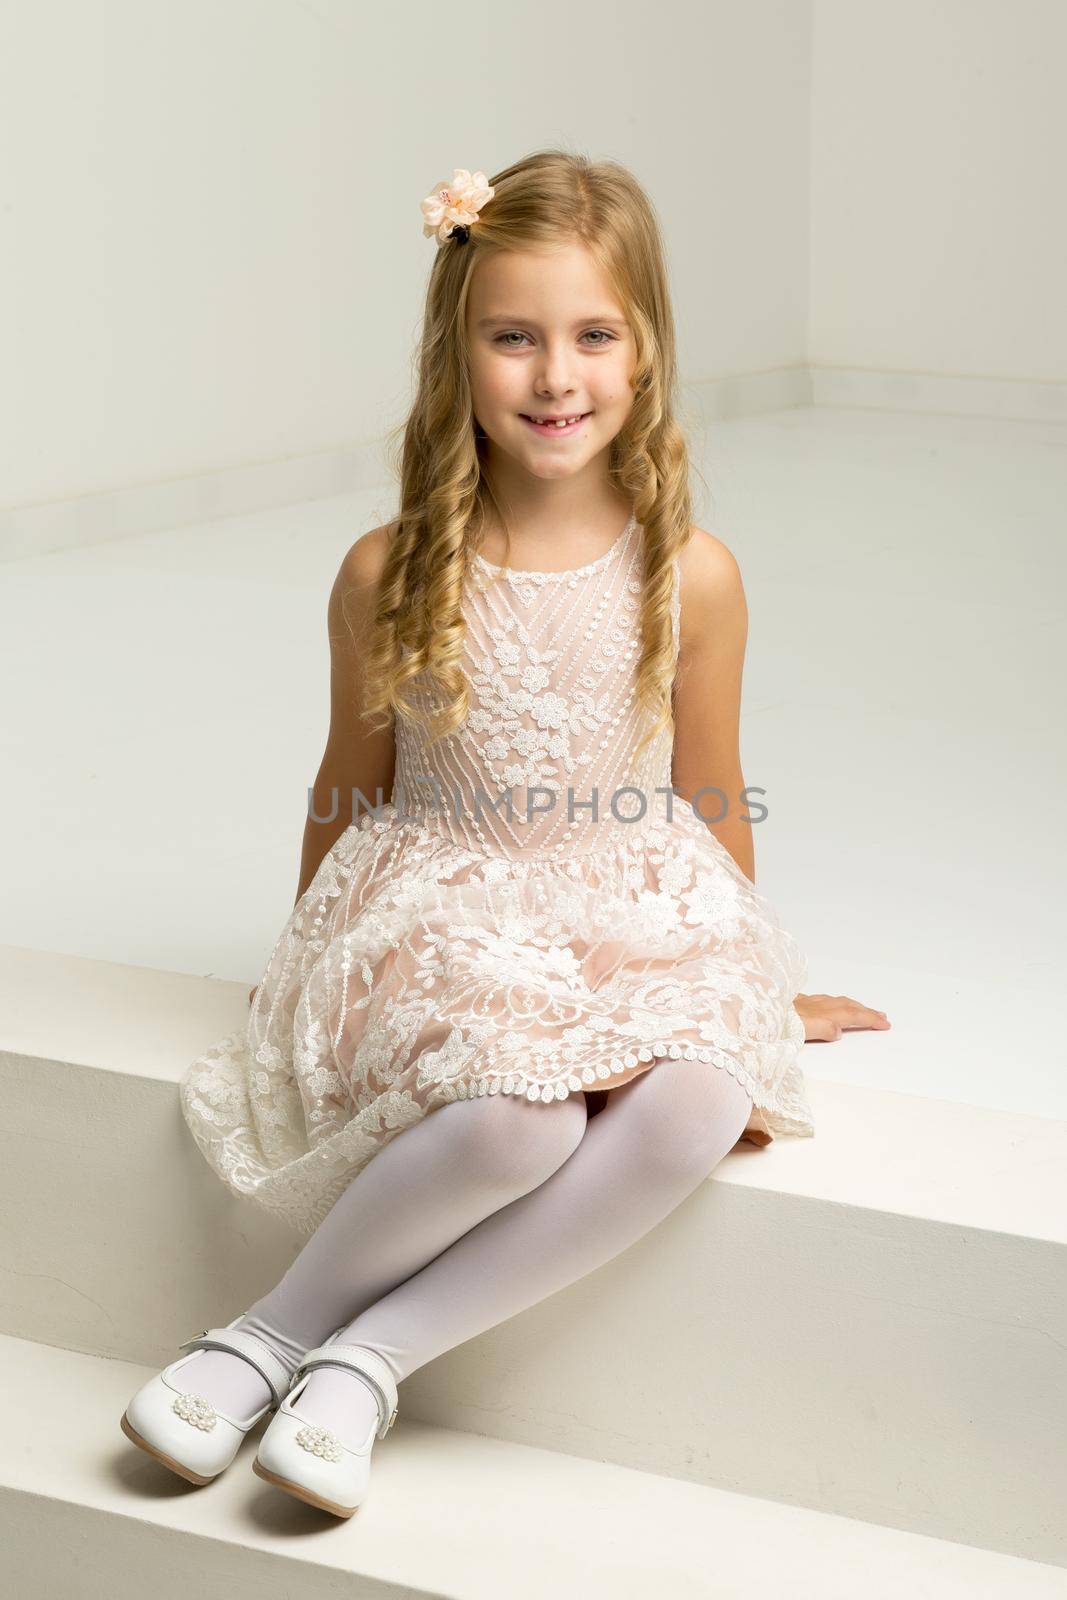 Lovely girl sitting on white staircase. Portrait of beautiful blonde girl wearing nice dress, tights and shoes posing in studio. Lovely smiling seven years old kid sitting on white stairs